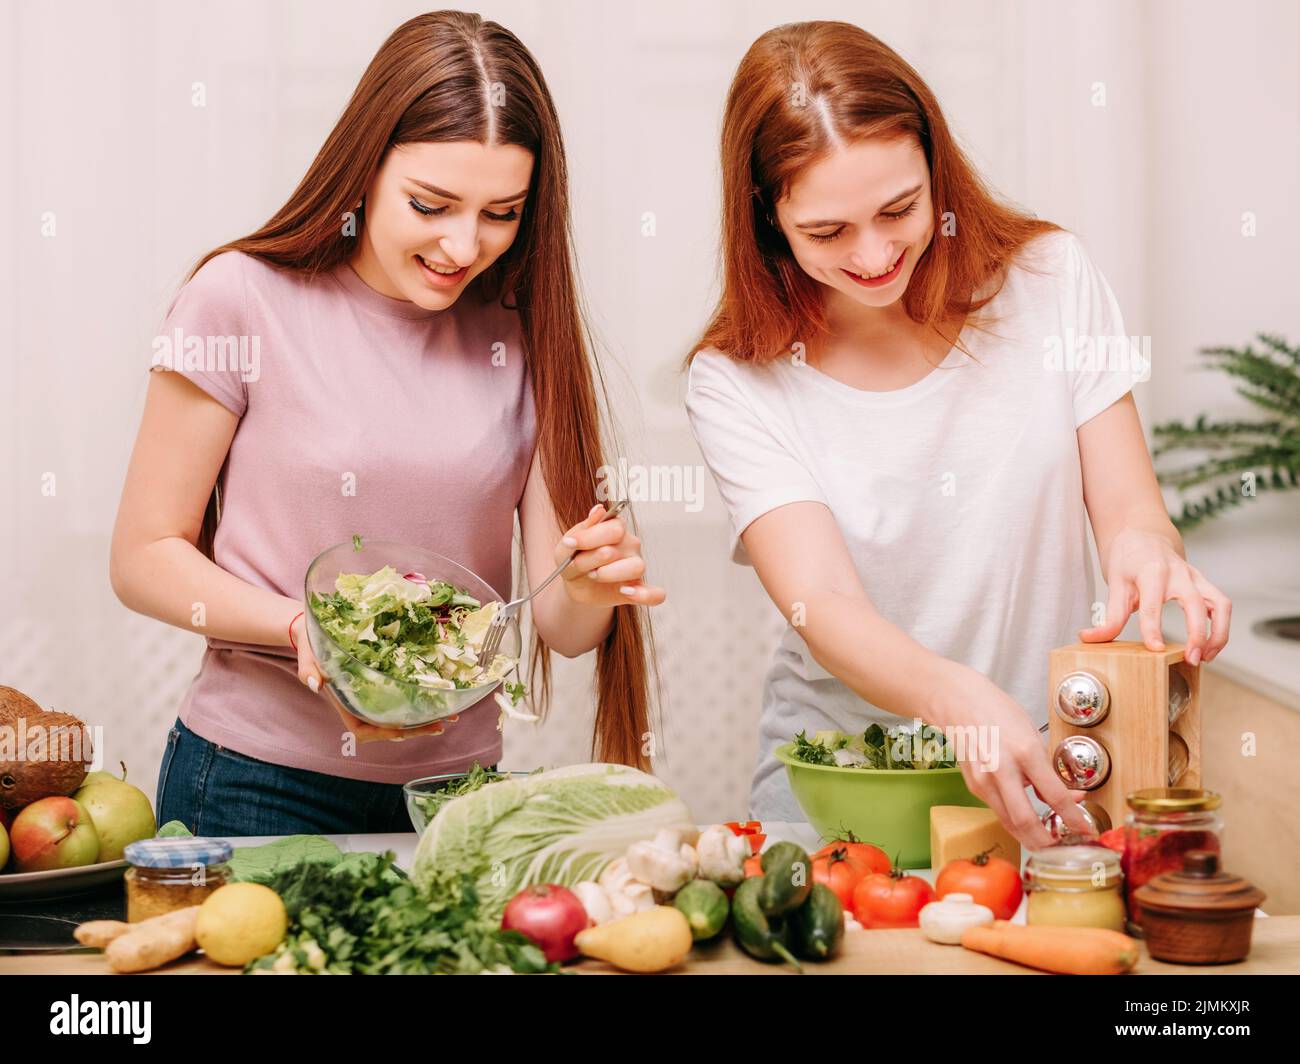 family unity cooking leisure sisters salad kitchen Stock Photo